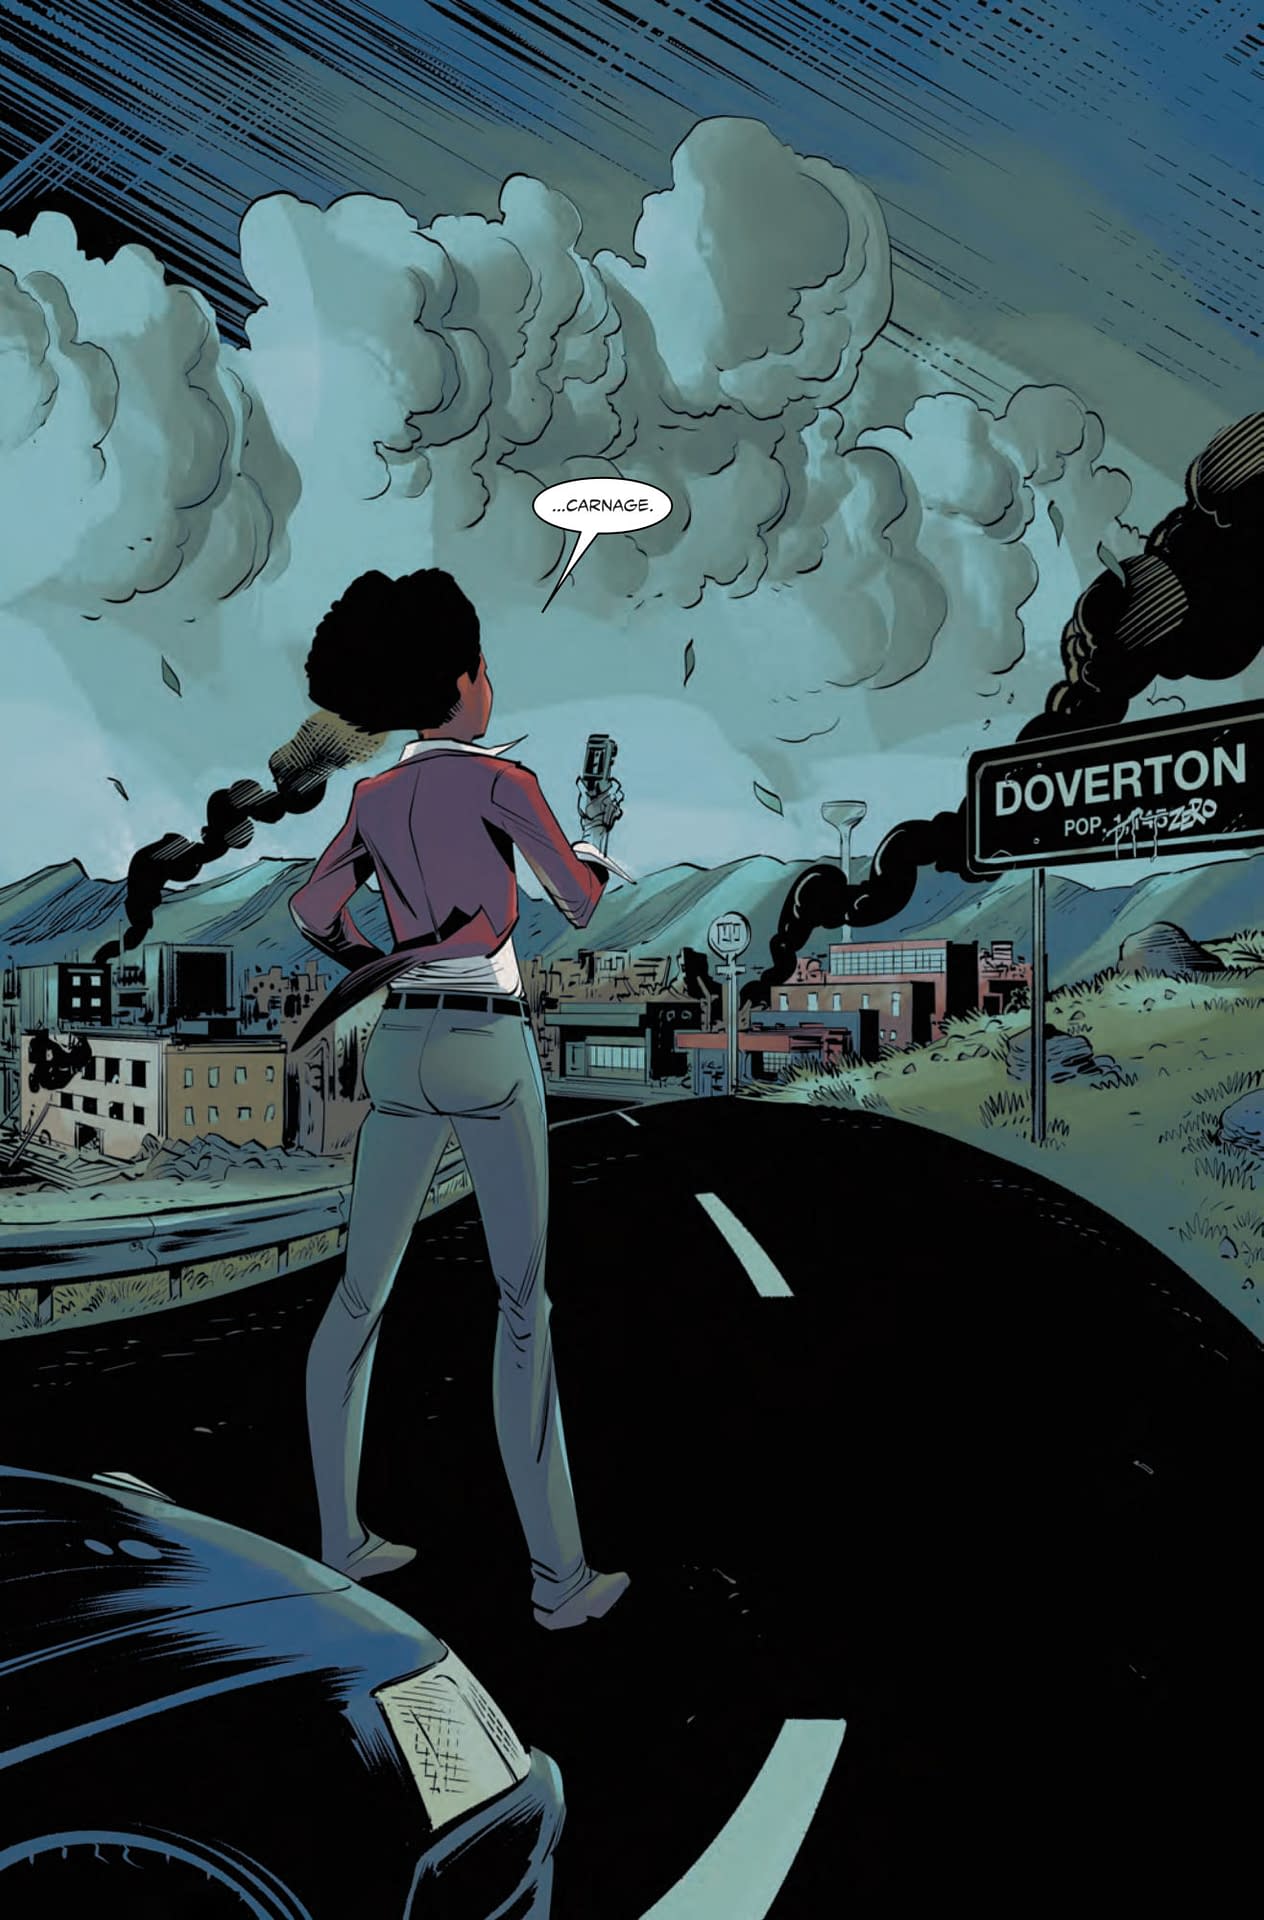 Who Does Misty Knight Meet in the Parking Lot in Frank Tieri's Web of Venom: Cult of Carnage #1?